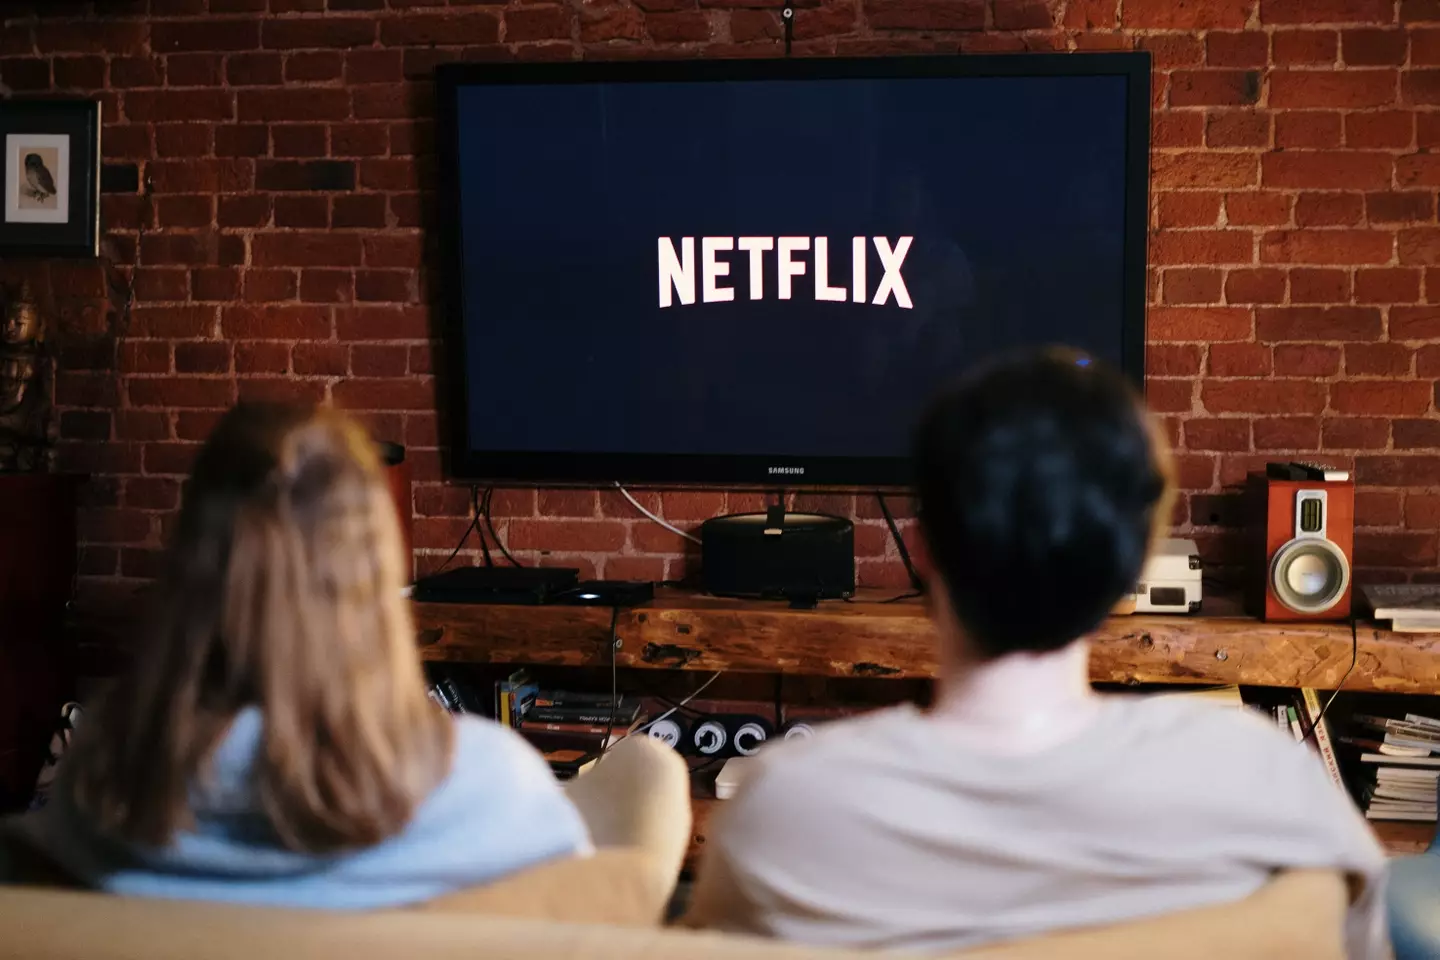 Expect your parent's Netflix account to stop working for you soon.